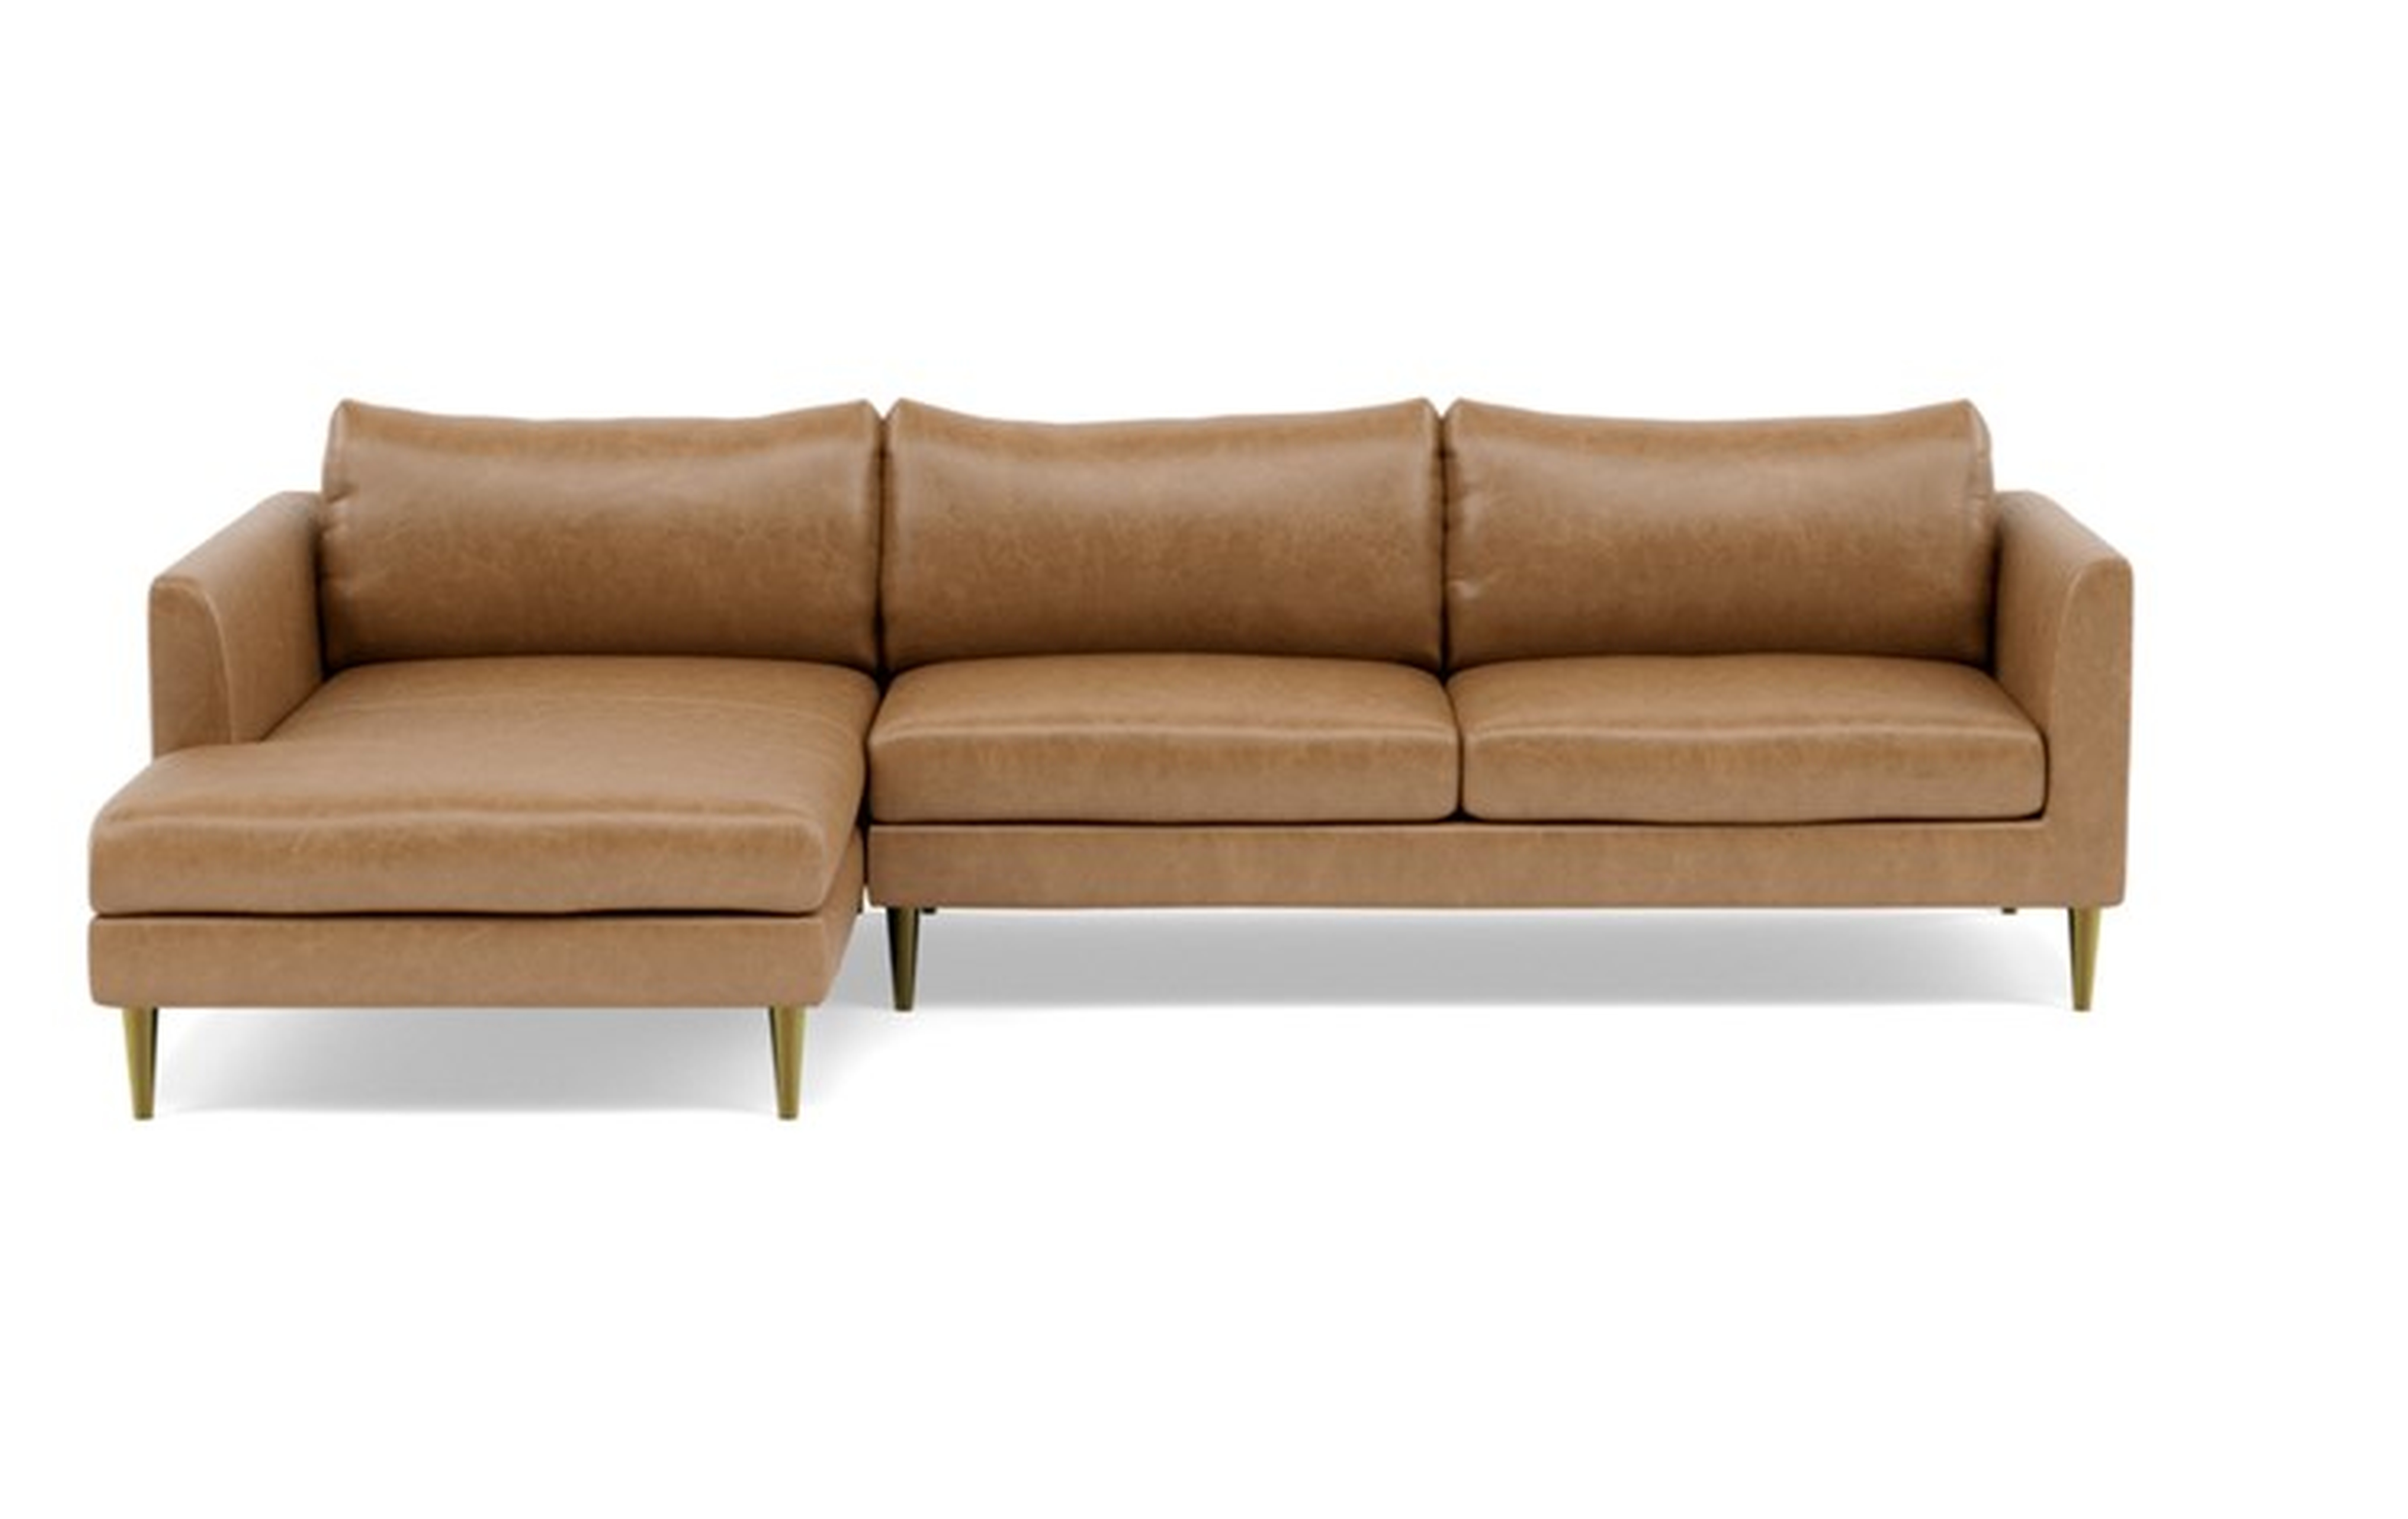 Owens Leather Left Sectional with Brown Palomino Leather, down alternative cushions, extended chaise, and Brass Plated legs - Interior Define